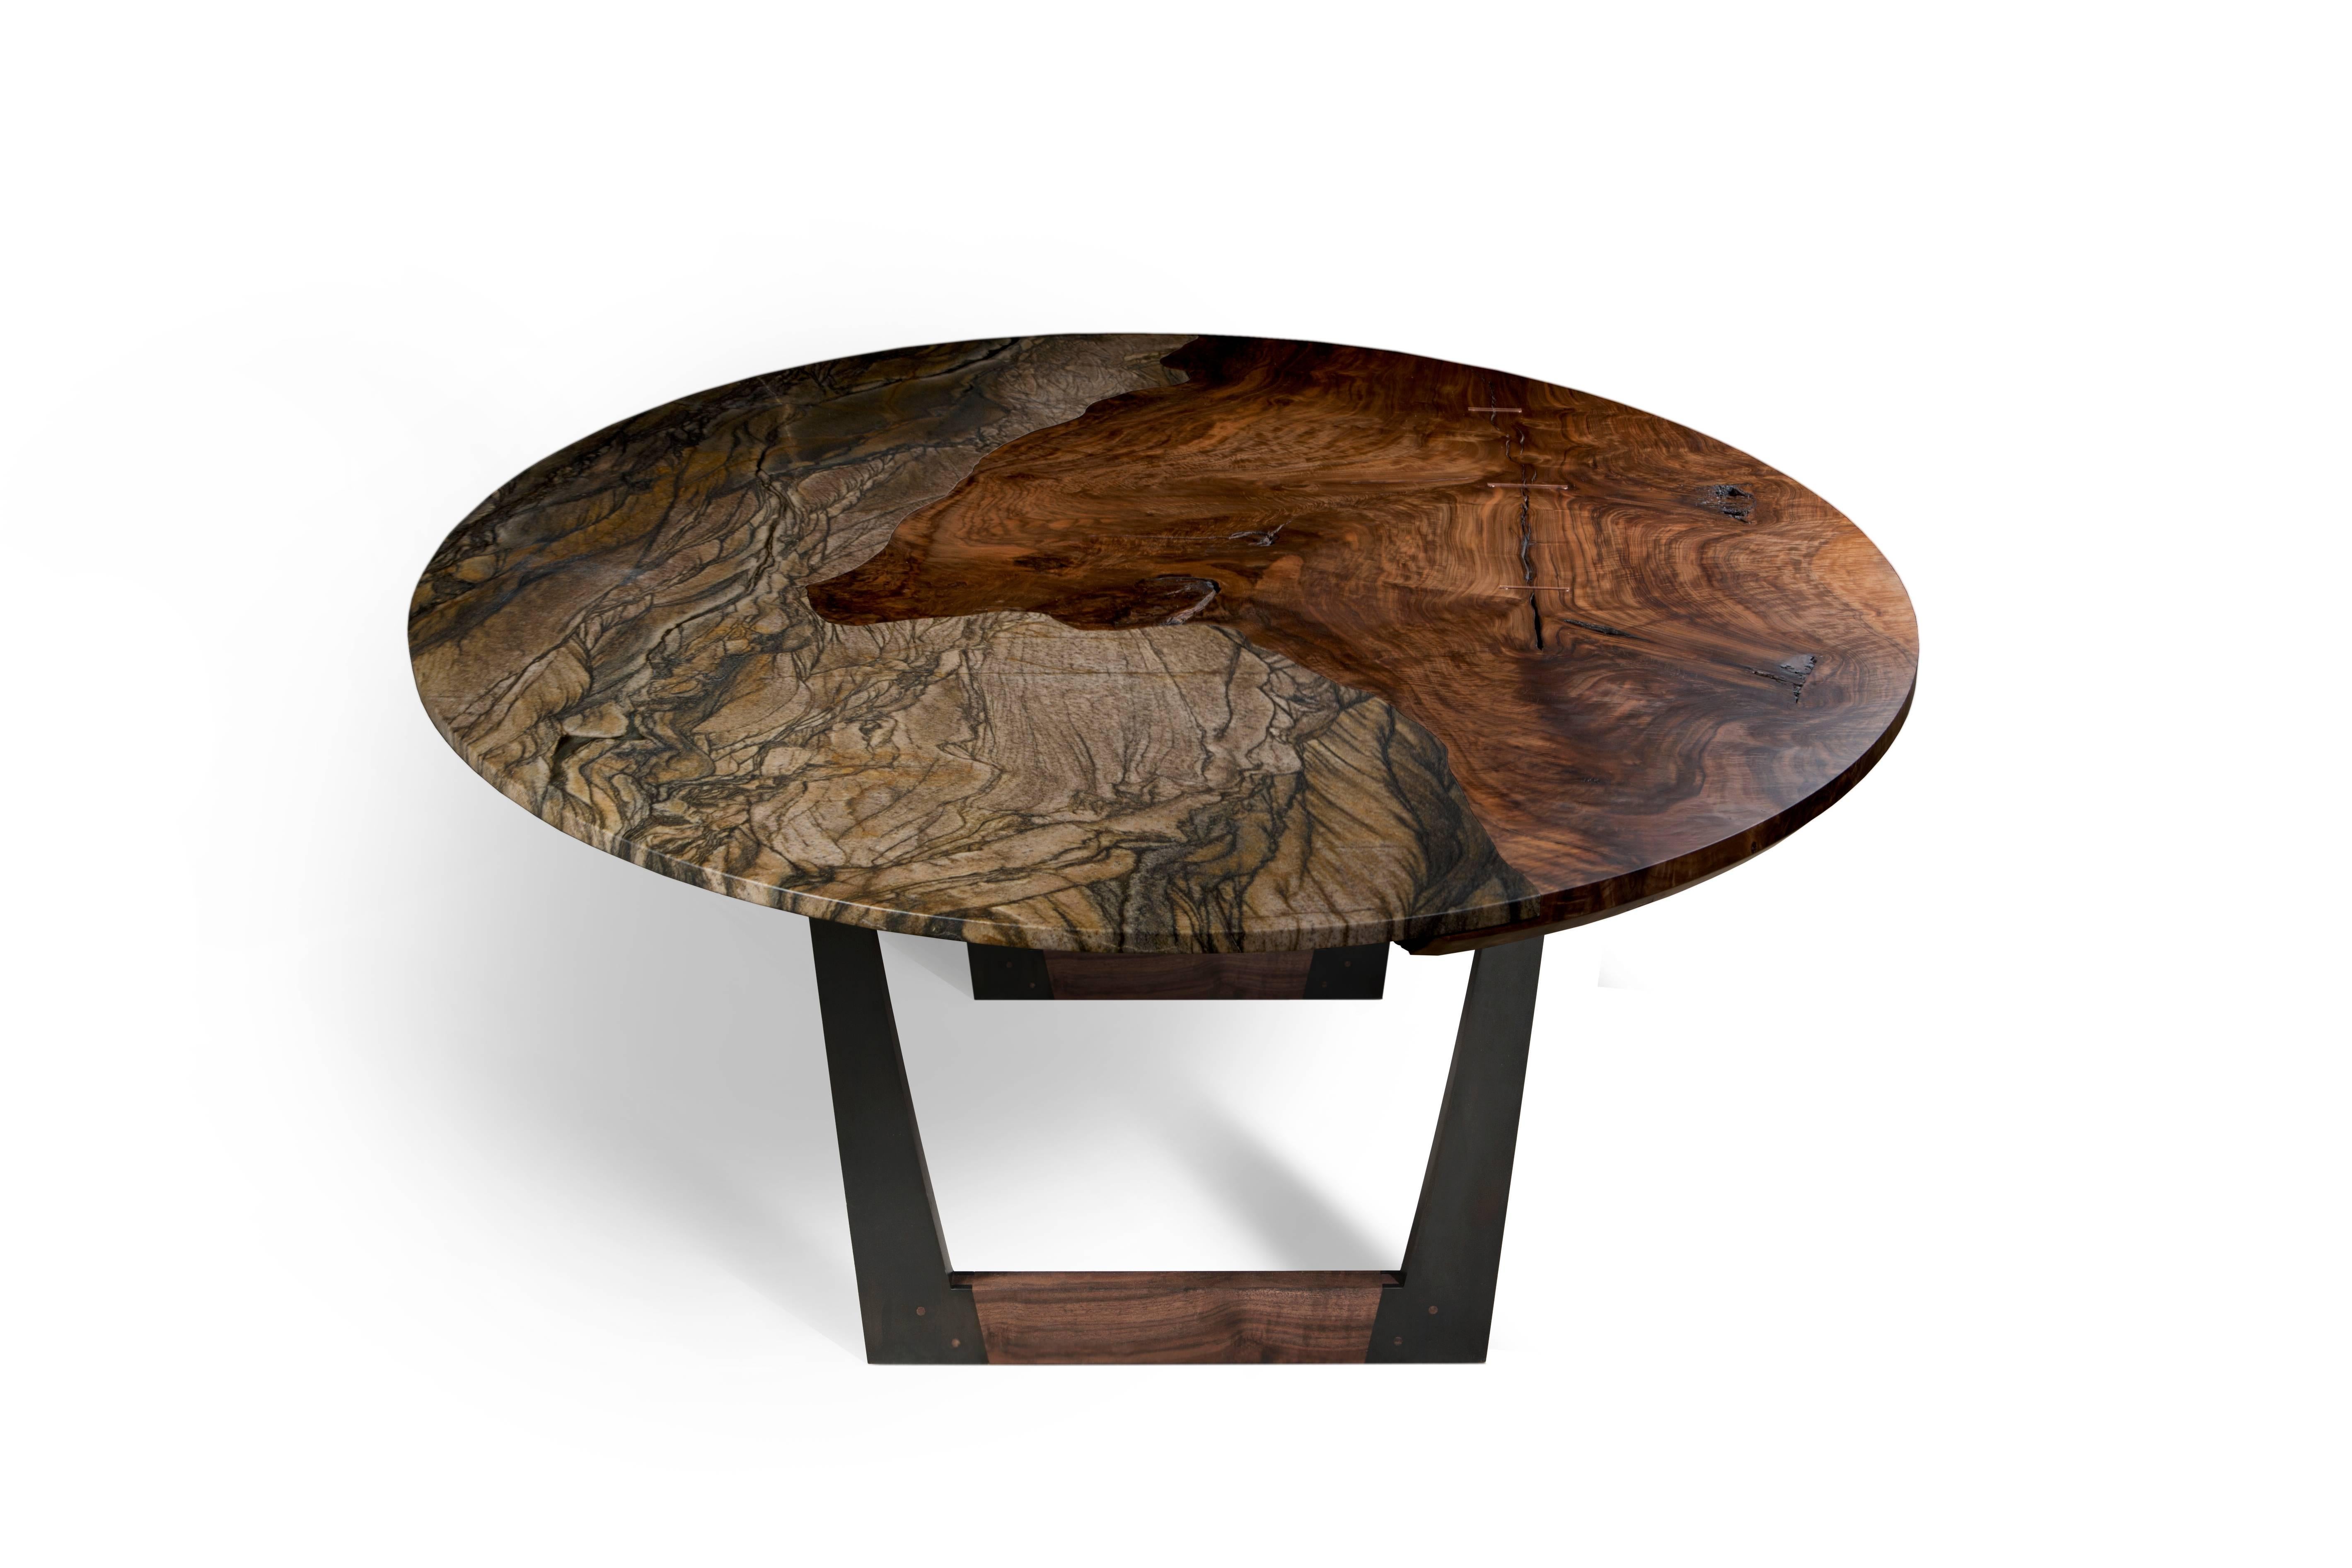 The Granite Pangea table by Taylor Donsker features a single granite slab seamlessly inlaid into the top of a single slab of highly figured Bastogne walnut that is resting upon two U-shaped blackened steel and Bastogne walnut bases. The result is a